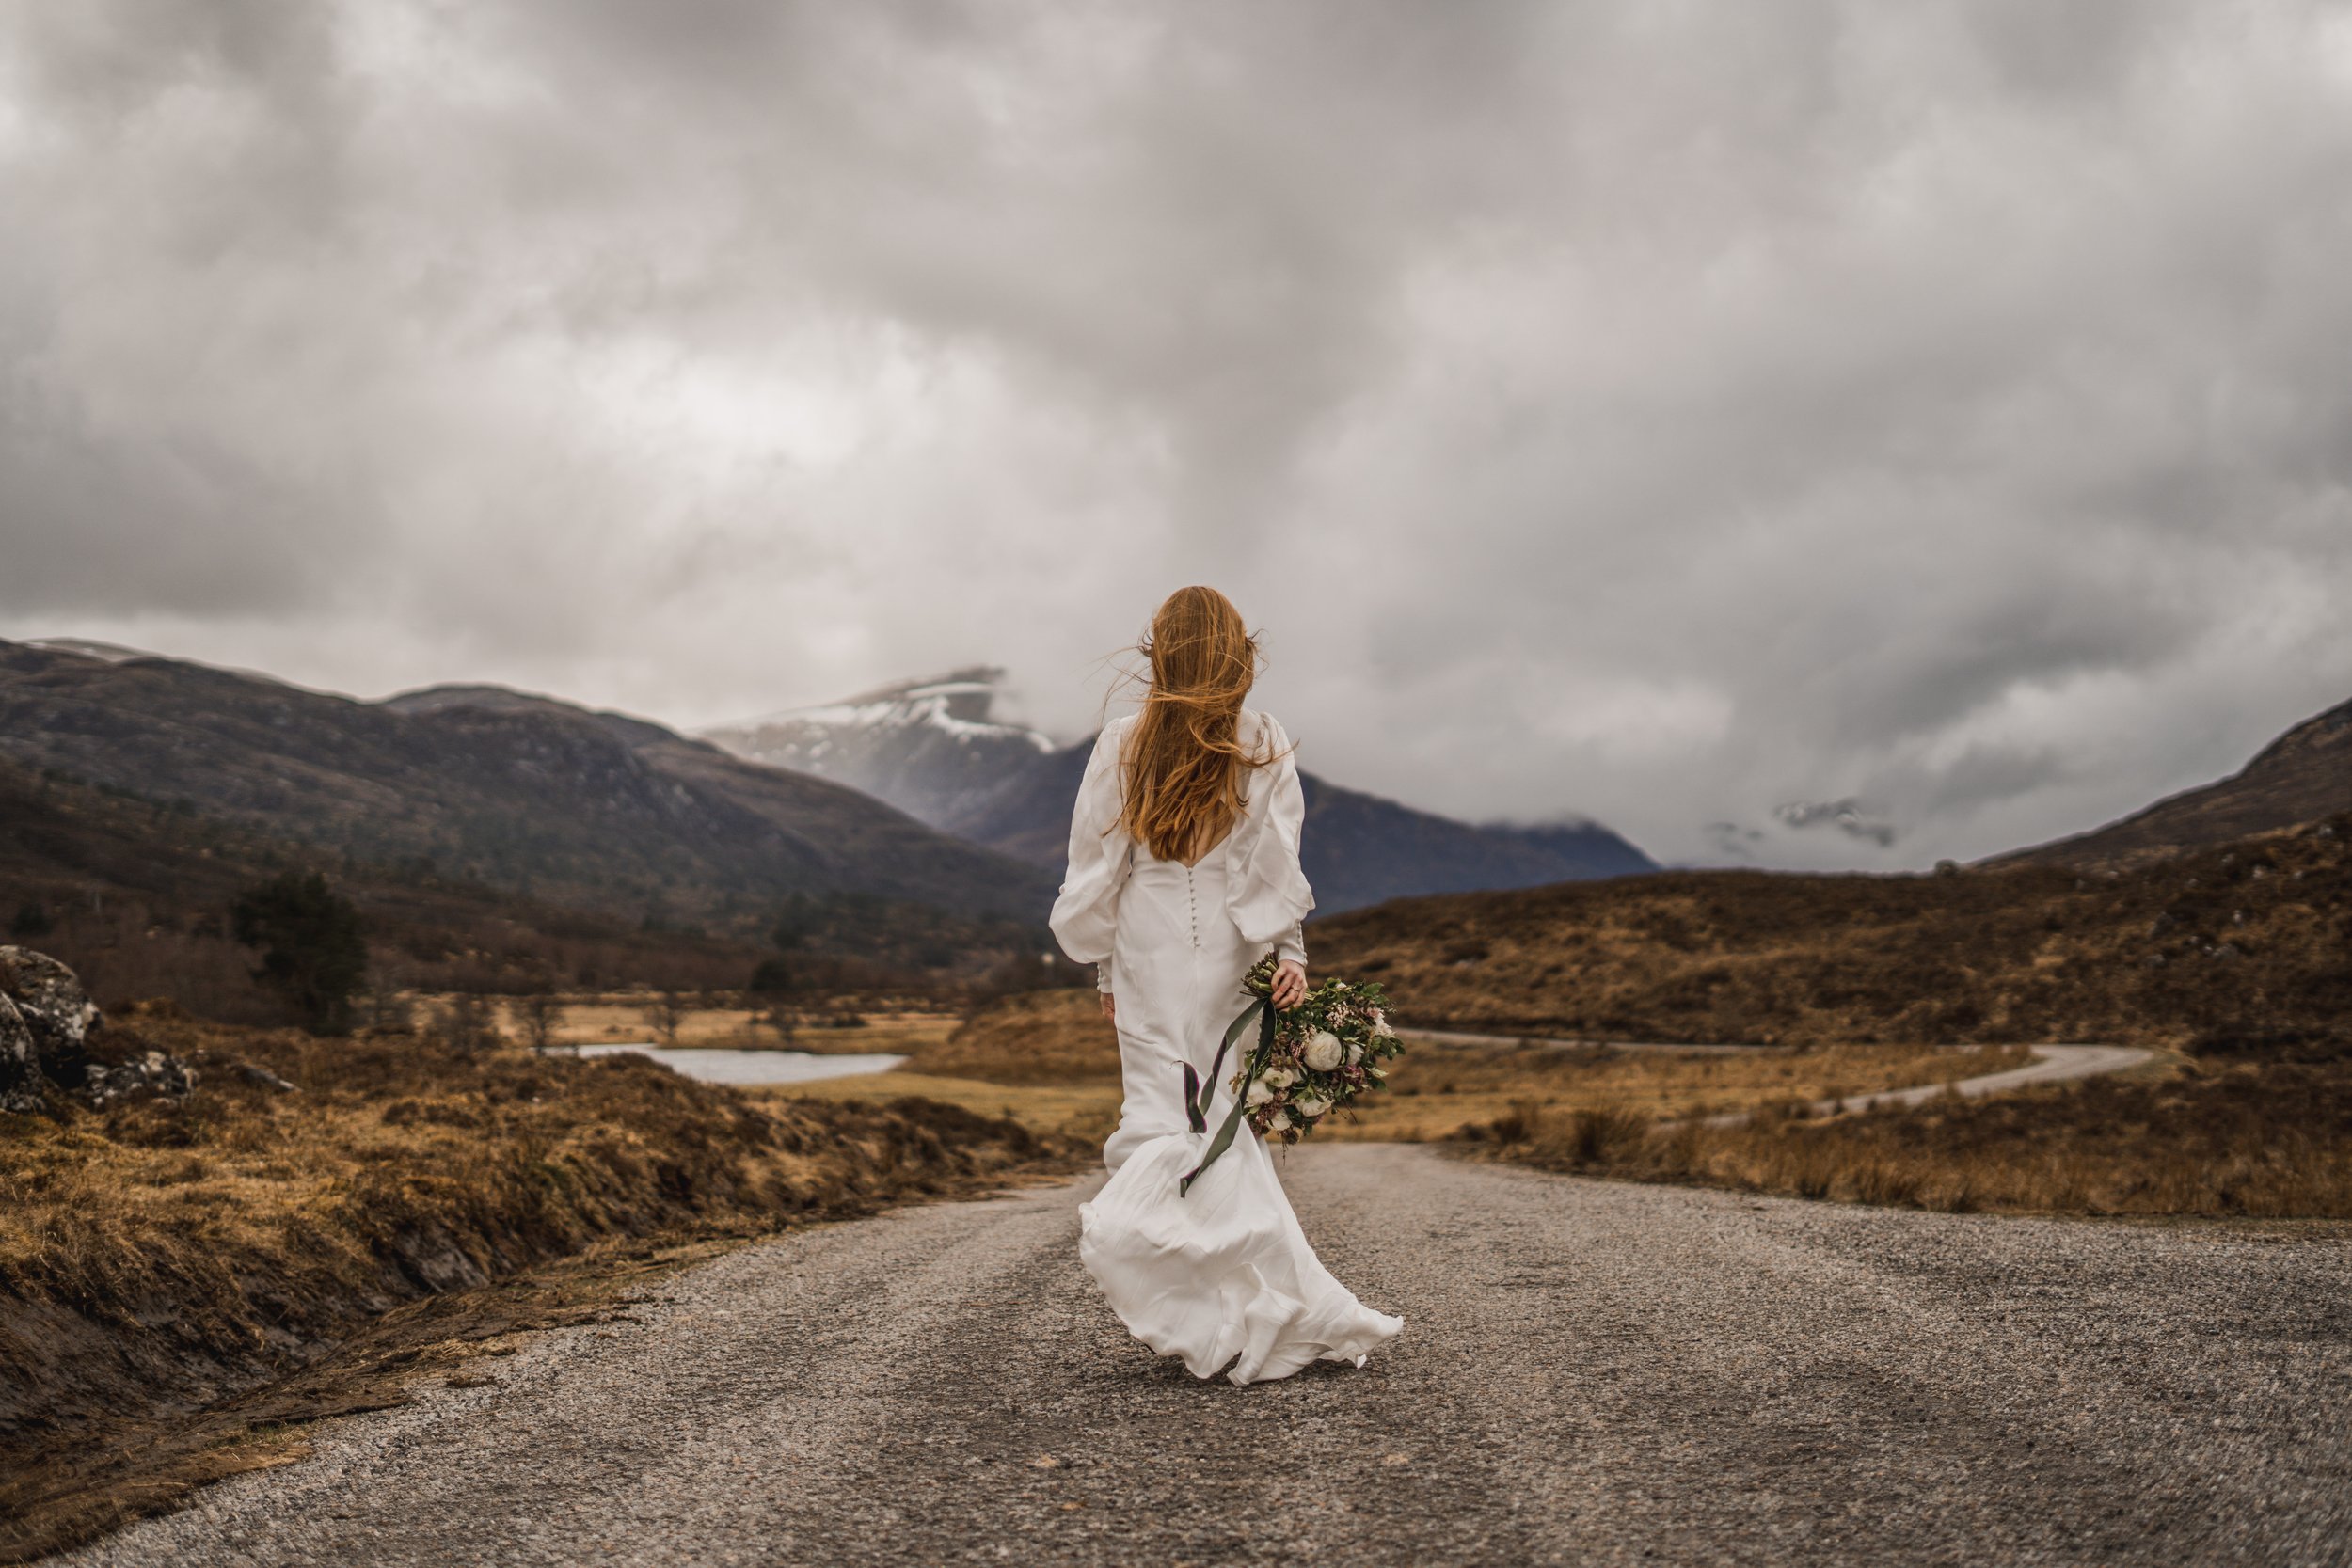 Bride walking along a country road with a bouquet in hand, surrounded by the Scottish hills